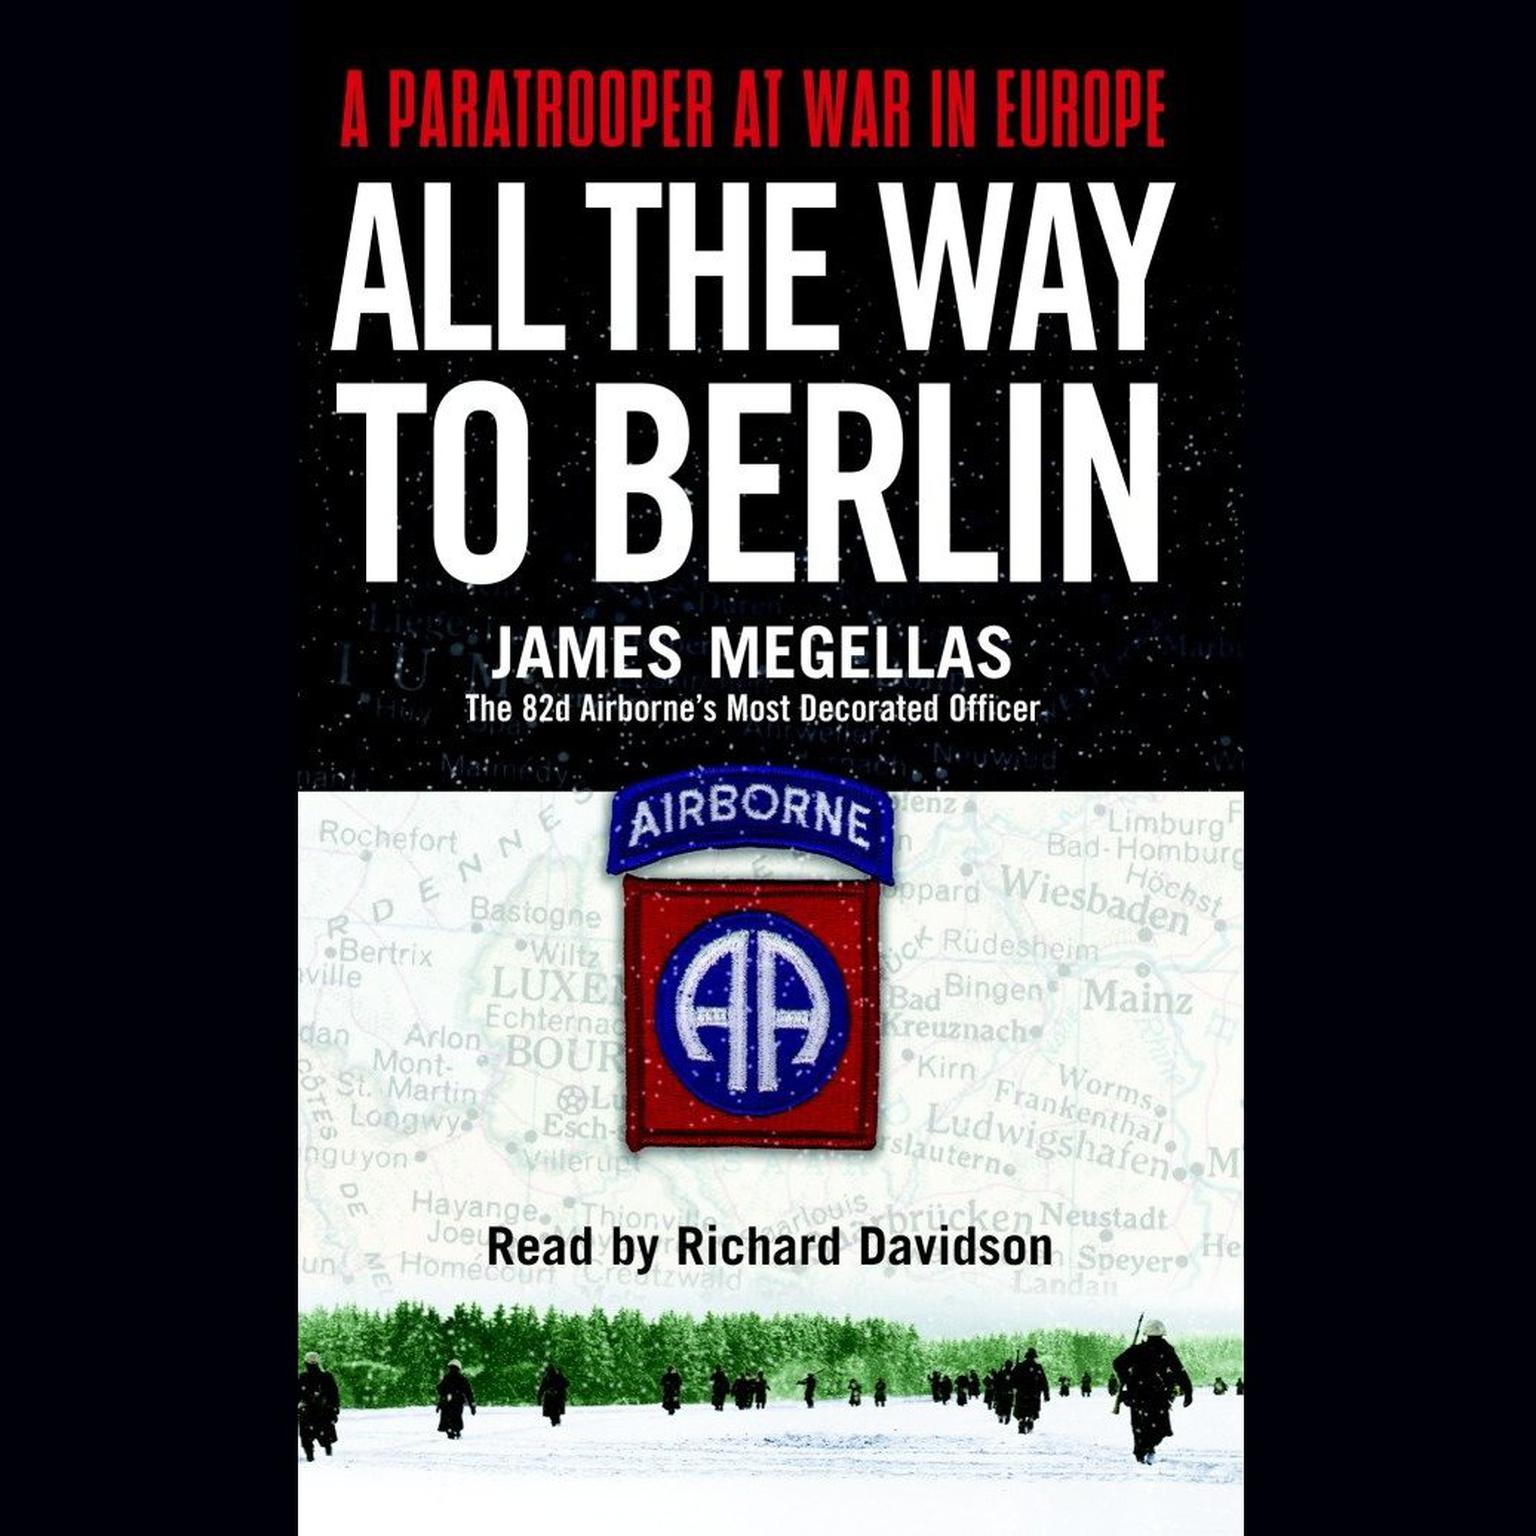 All the Way to Berlin (Abridged): A Paratrooper at War in Europe Audiobook, by James Megellas